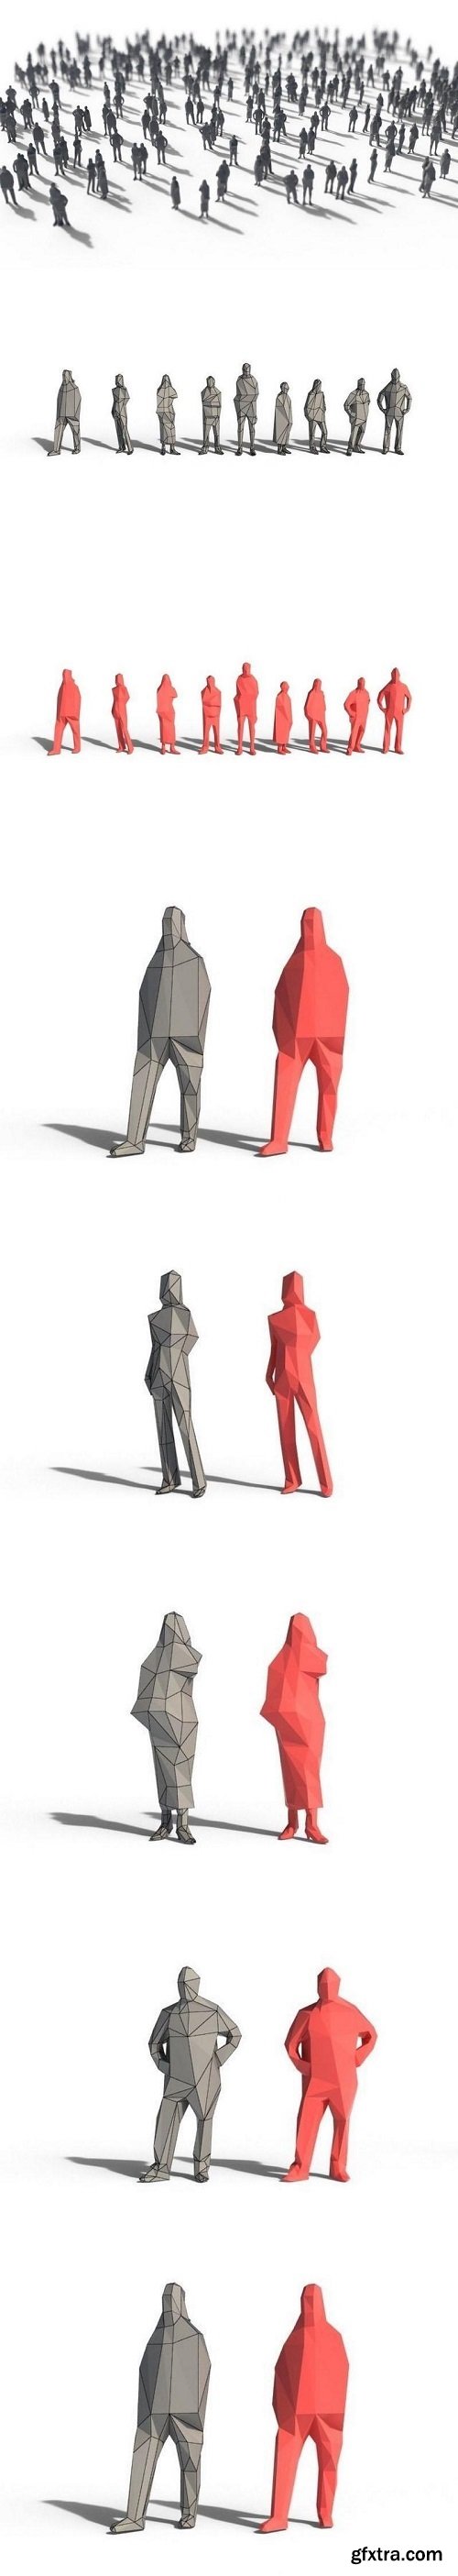 Low Poly Posed People Pack